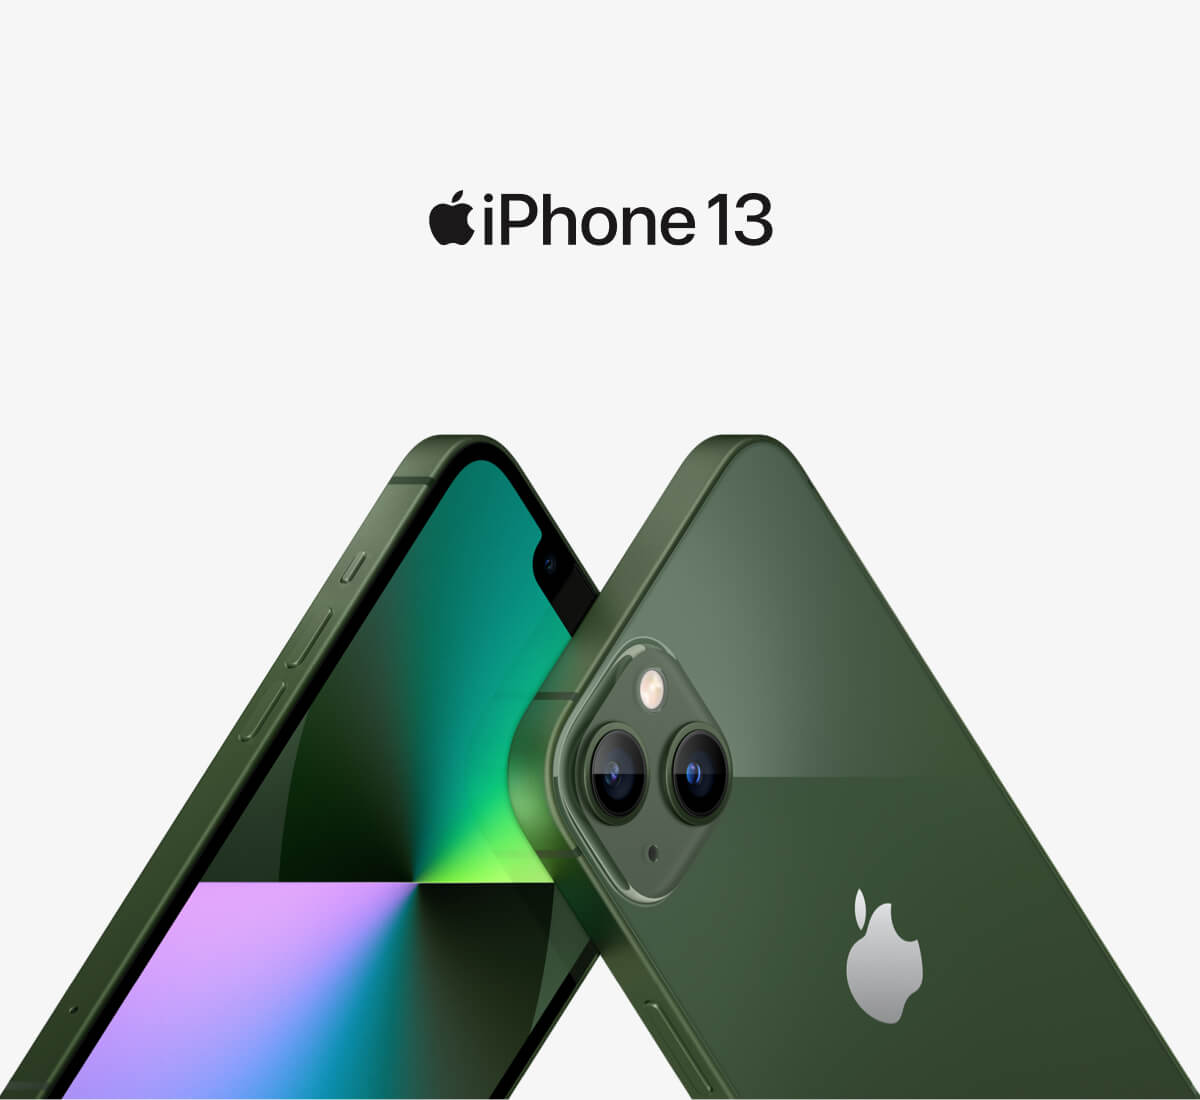 image of two iPhone 13s in green.